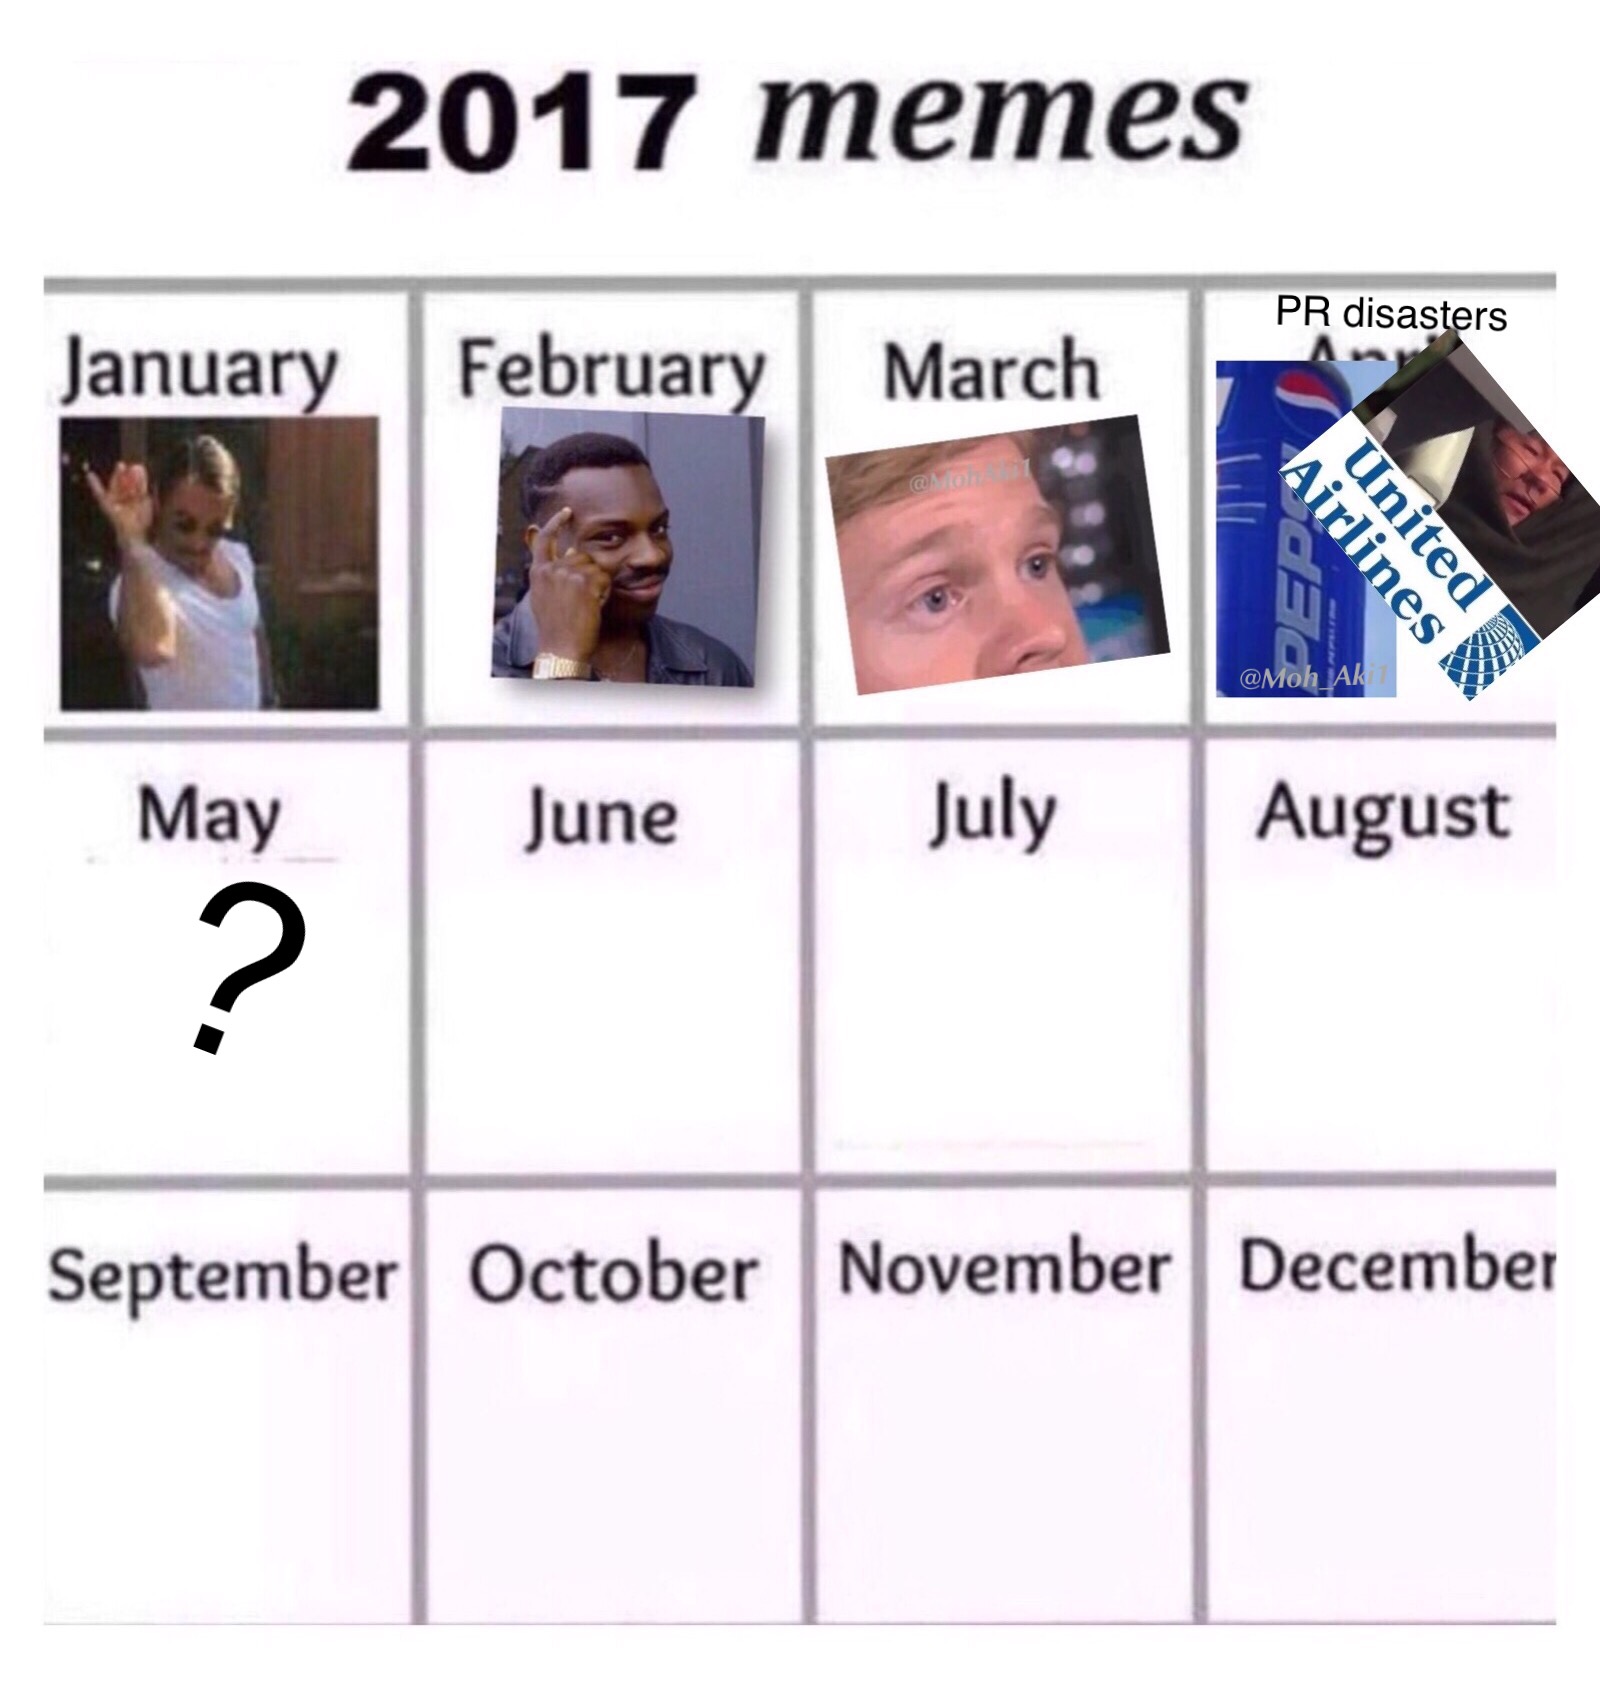 memes of every month 2017 - 2017 memes Pr disasters January February March Airlines United May June July August September October November December